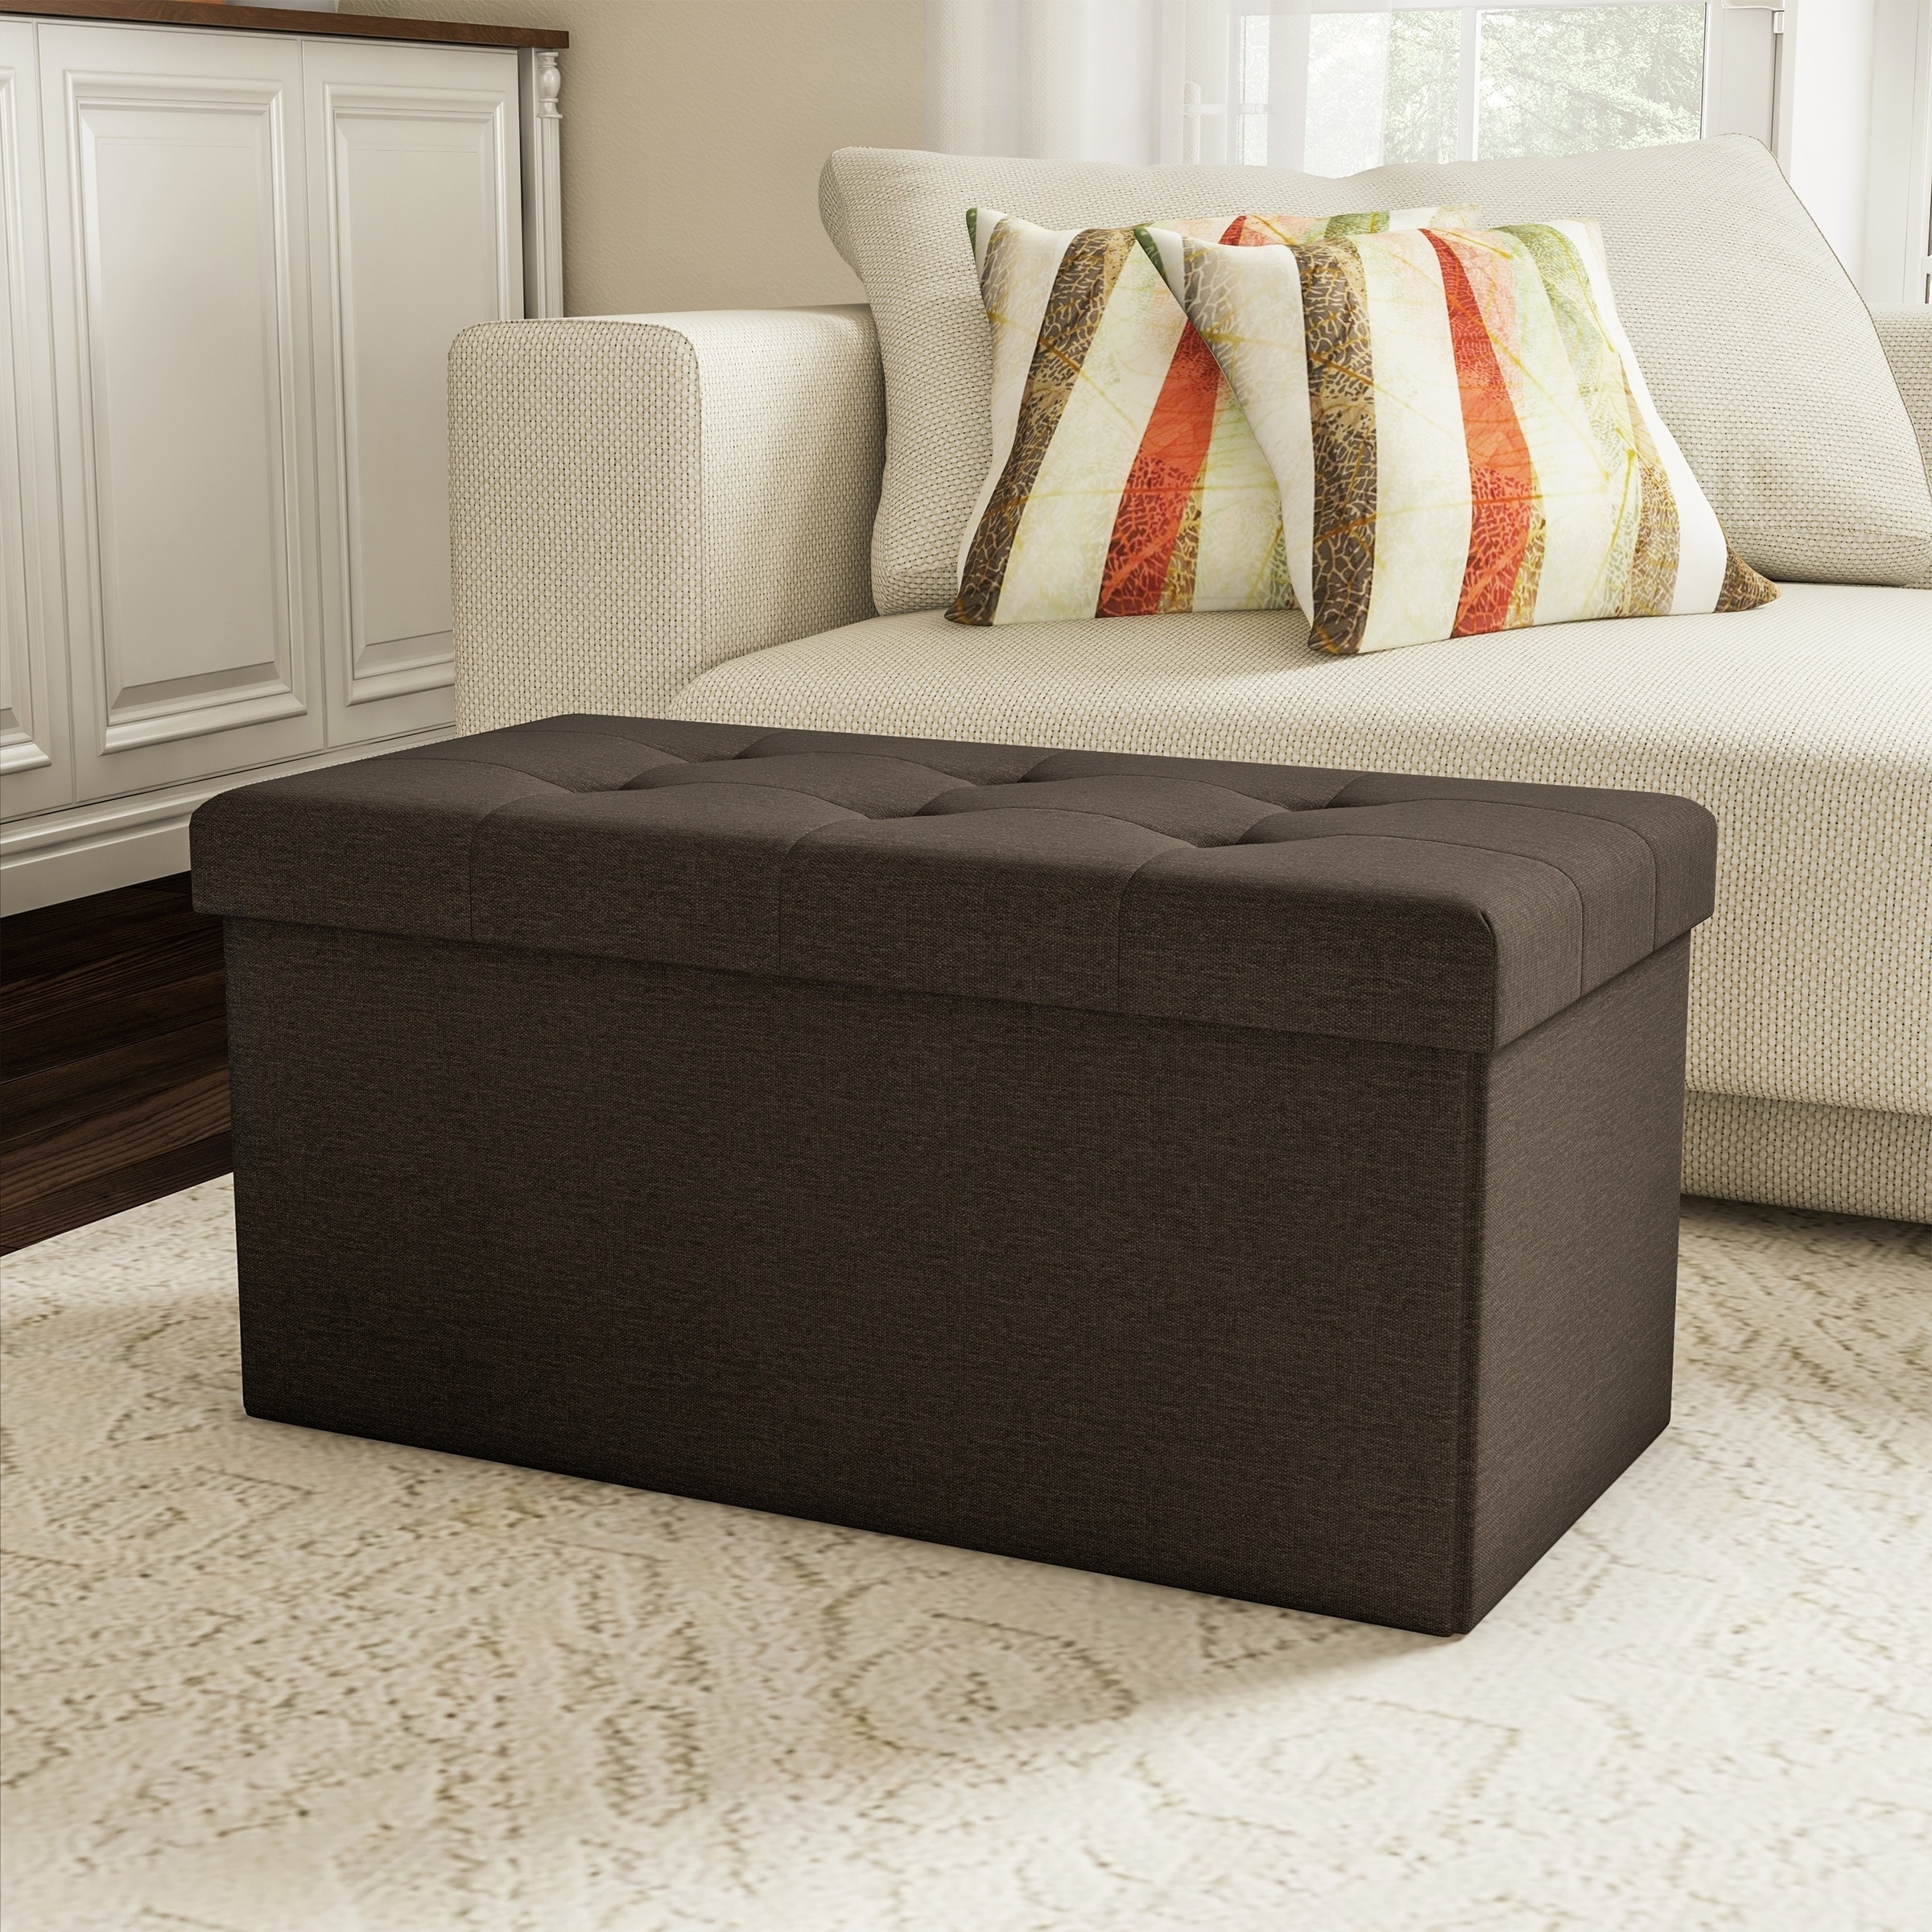 https://ak1.ostkcdn.com/images/products/27031676/Large-Folding-Storage-Bench-Ottoman-Tufted-Cube-Organizer-Furniture-with-Removeable-Bin-by-Lavish-Home-30-x-15-x-15-9b1d5e4c-ff29-410c-aa9e-2b1d13717cd6.jpg